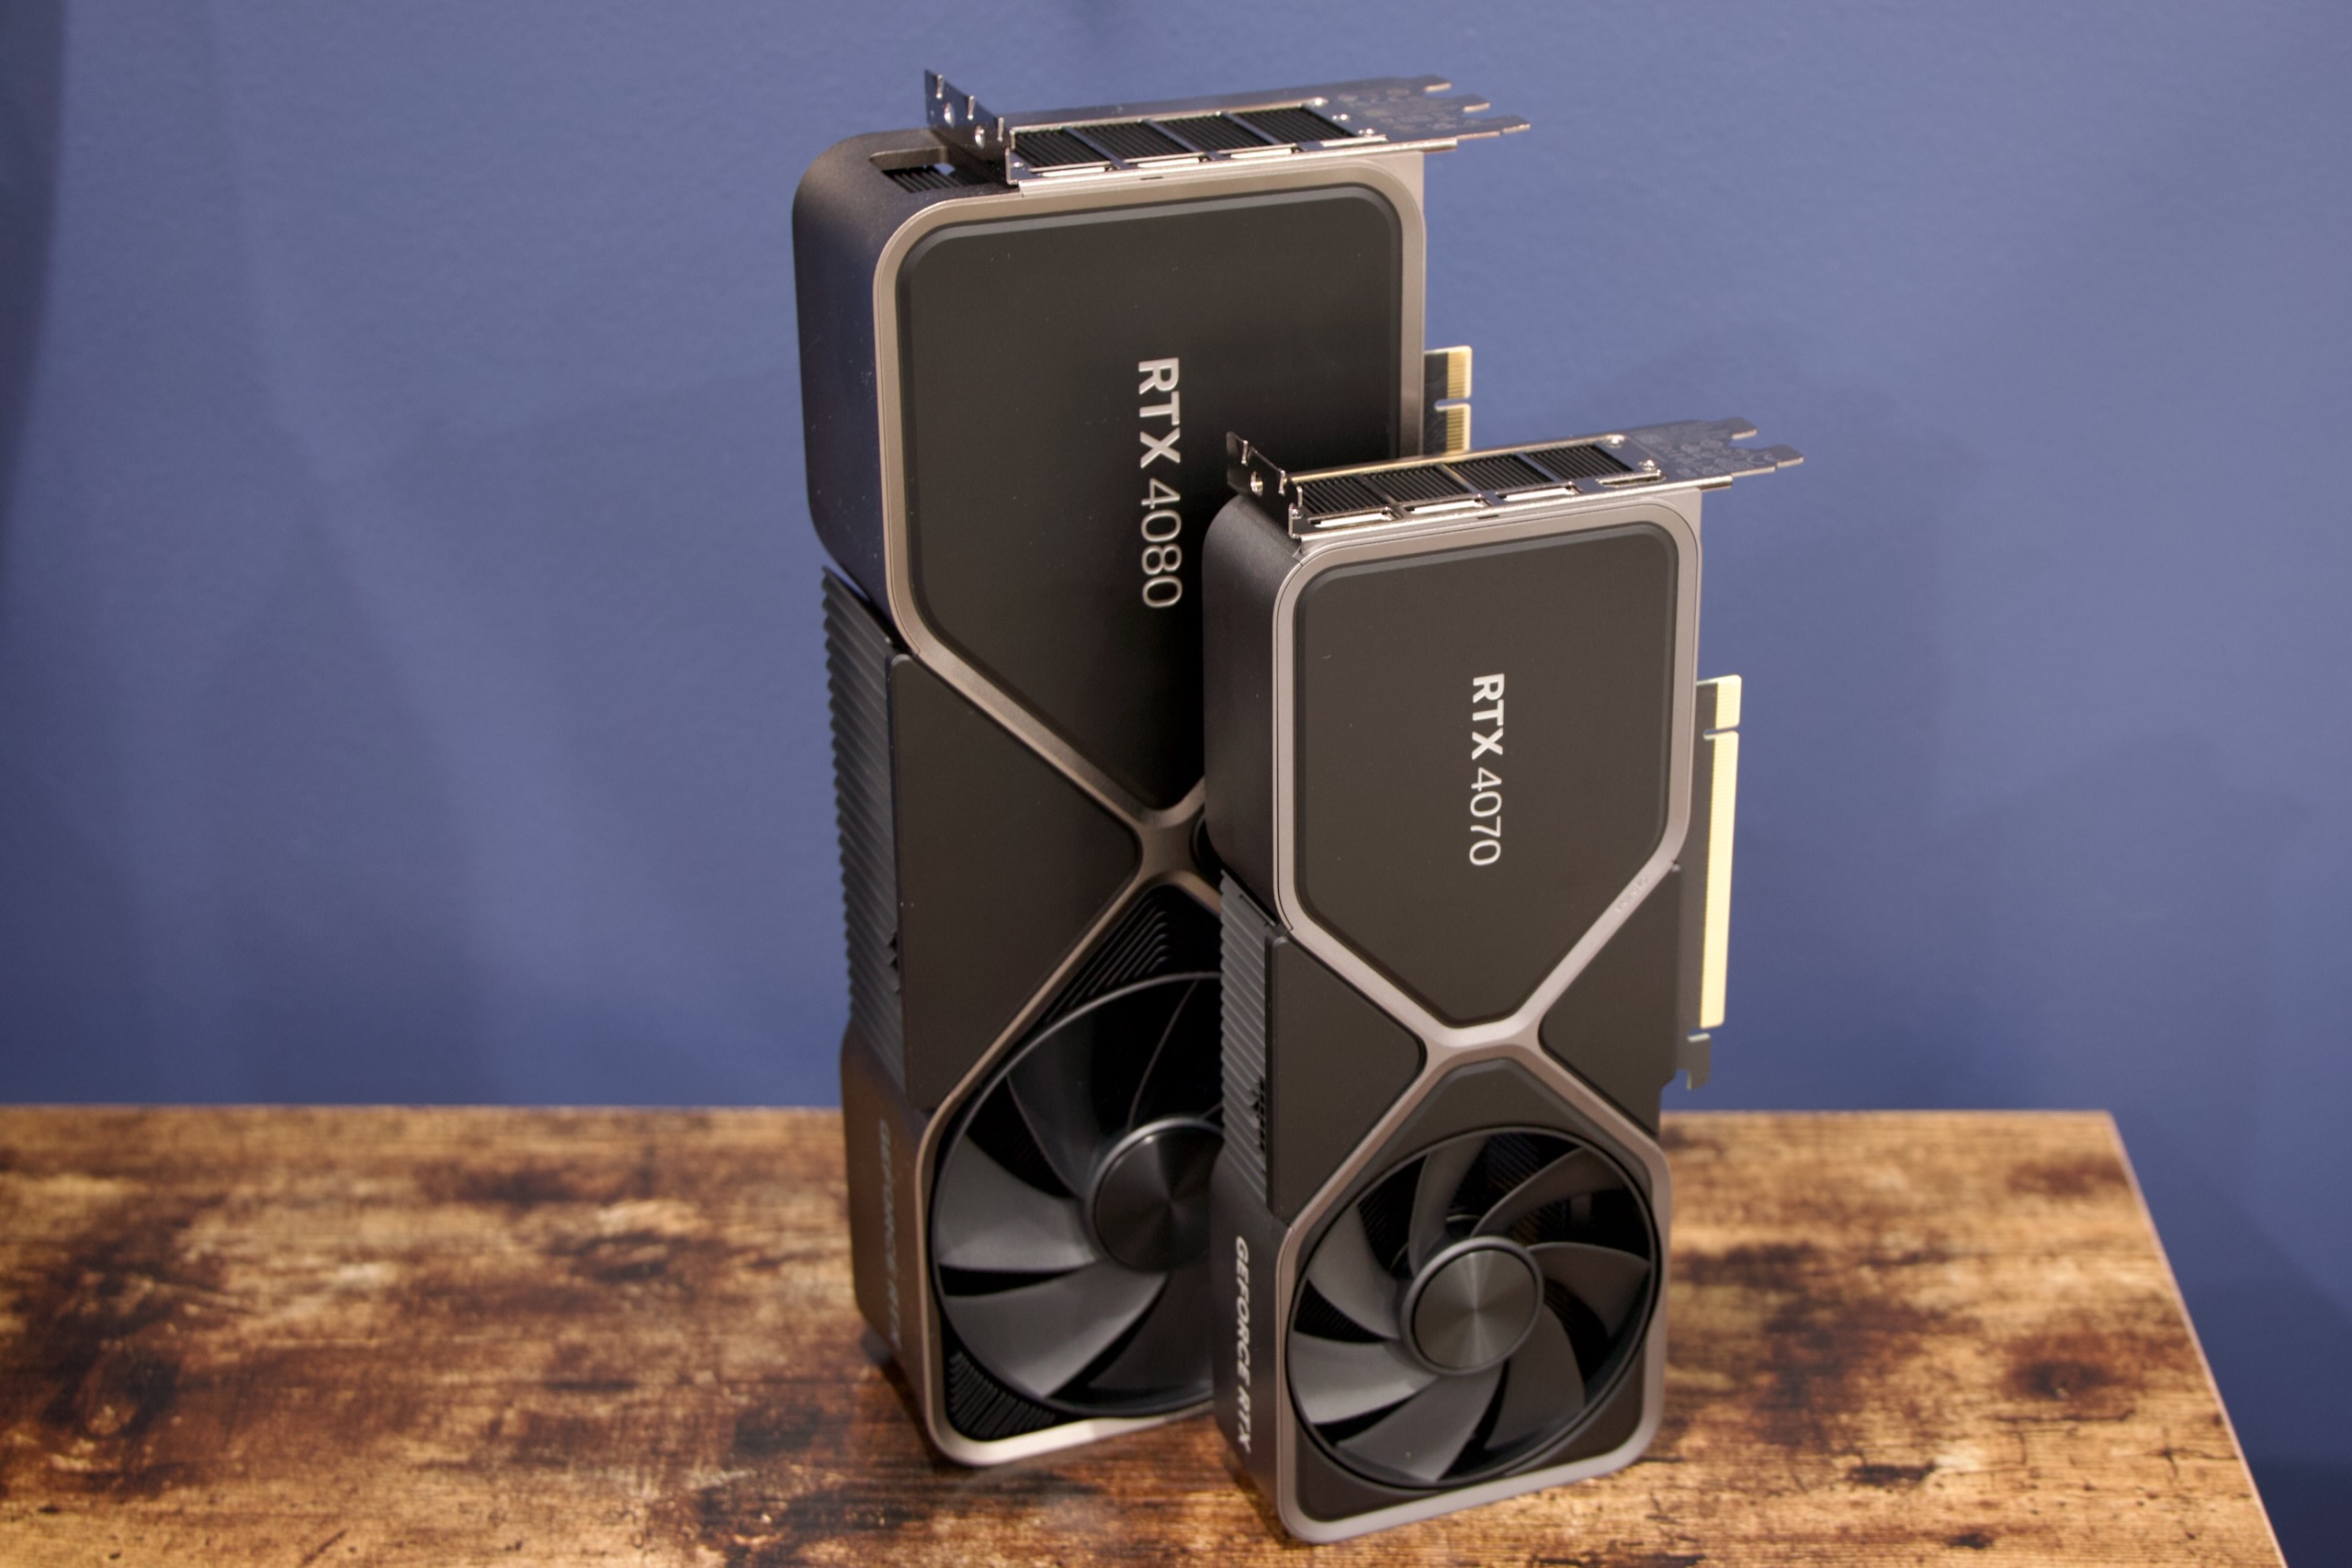 Nvidia could release a speedy new RTX 4070 Super that makes the